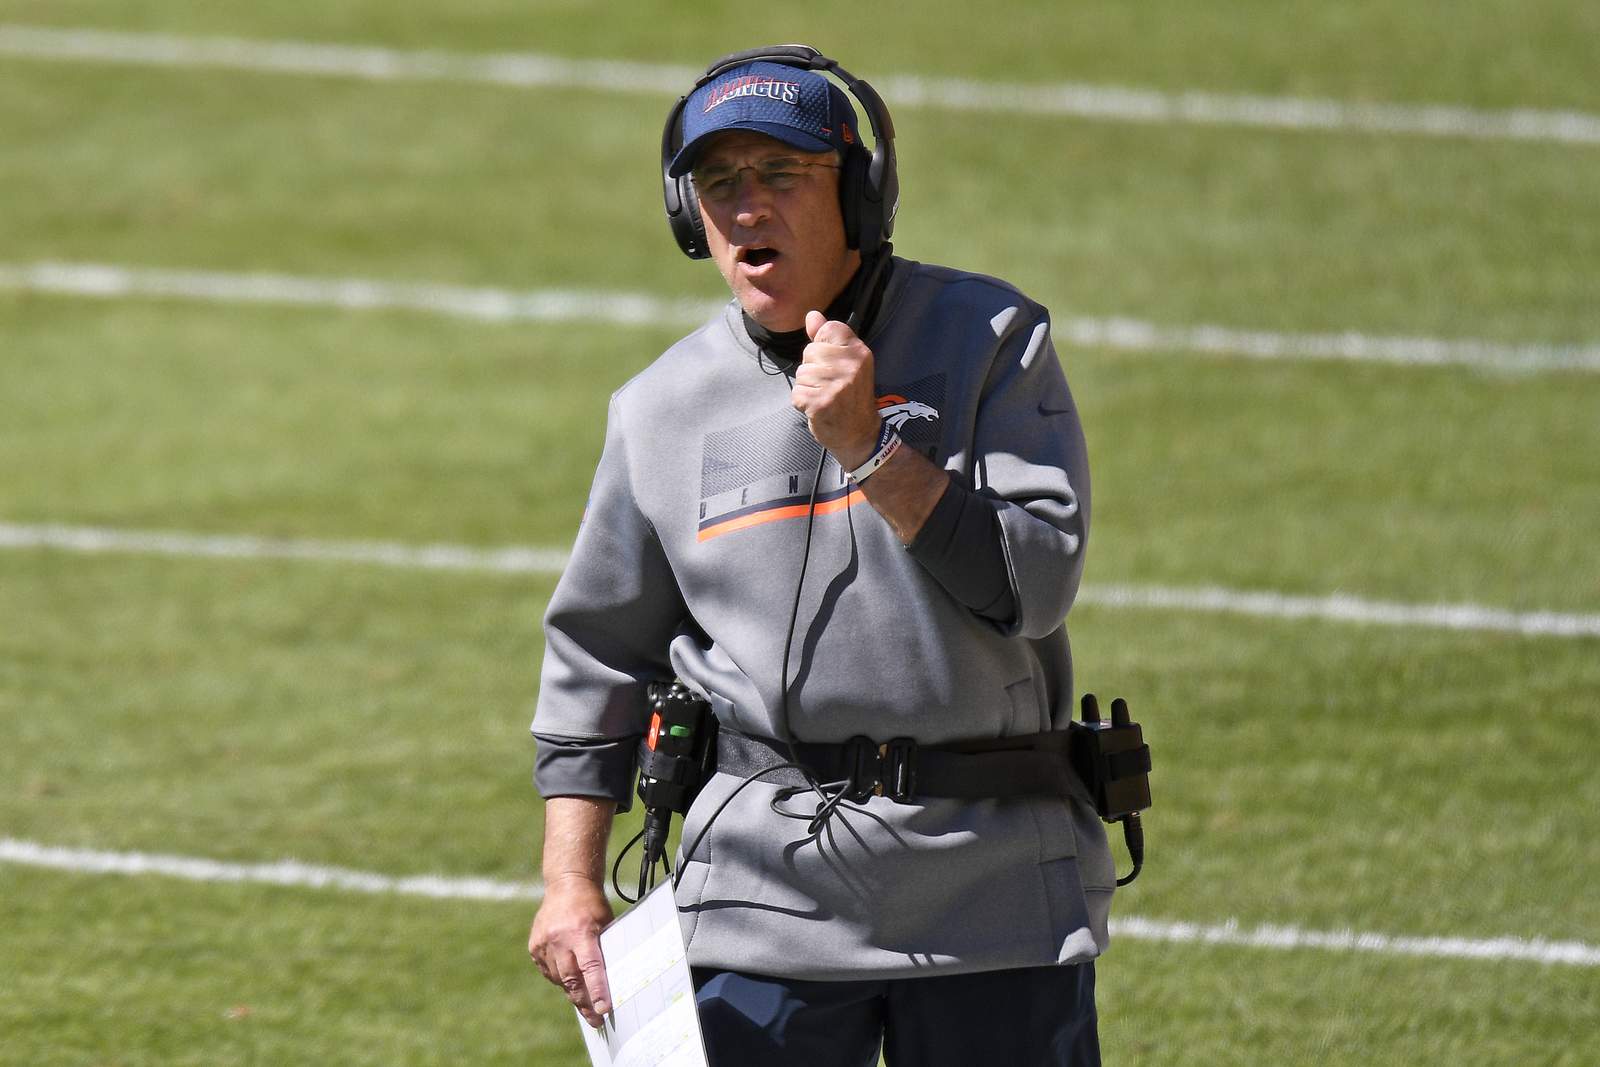 Unmasked: NFL fines coaches, teams for not covering faces